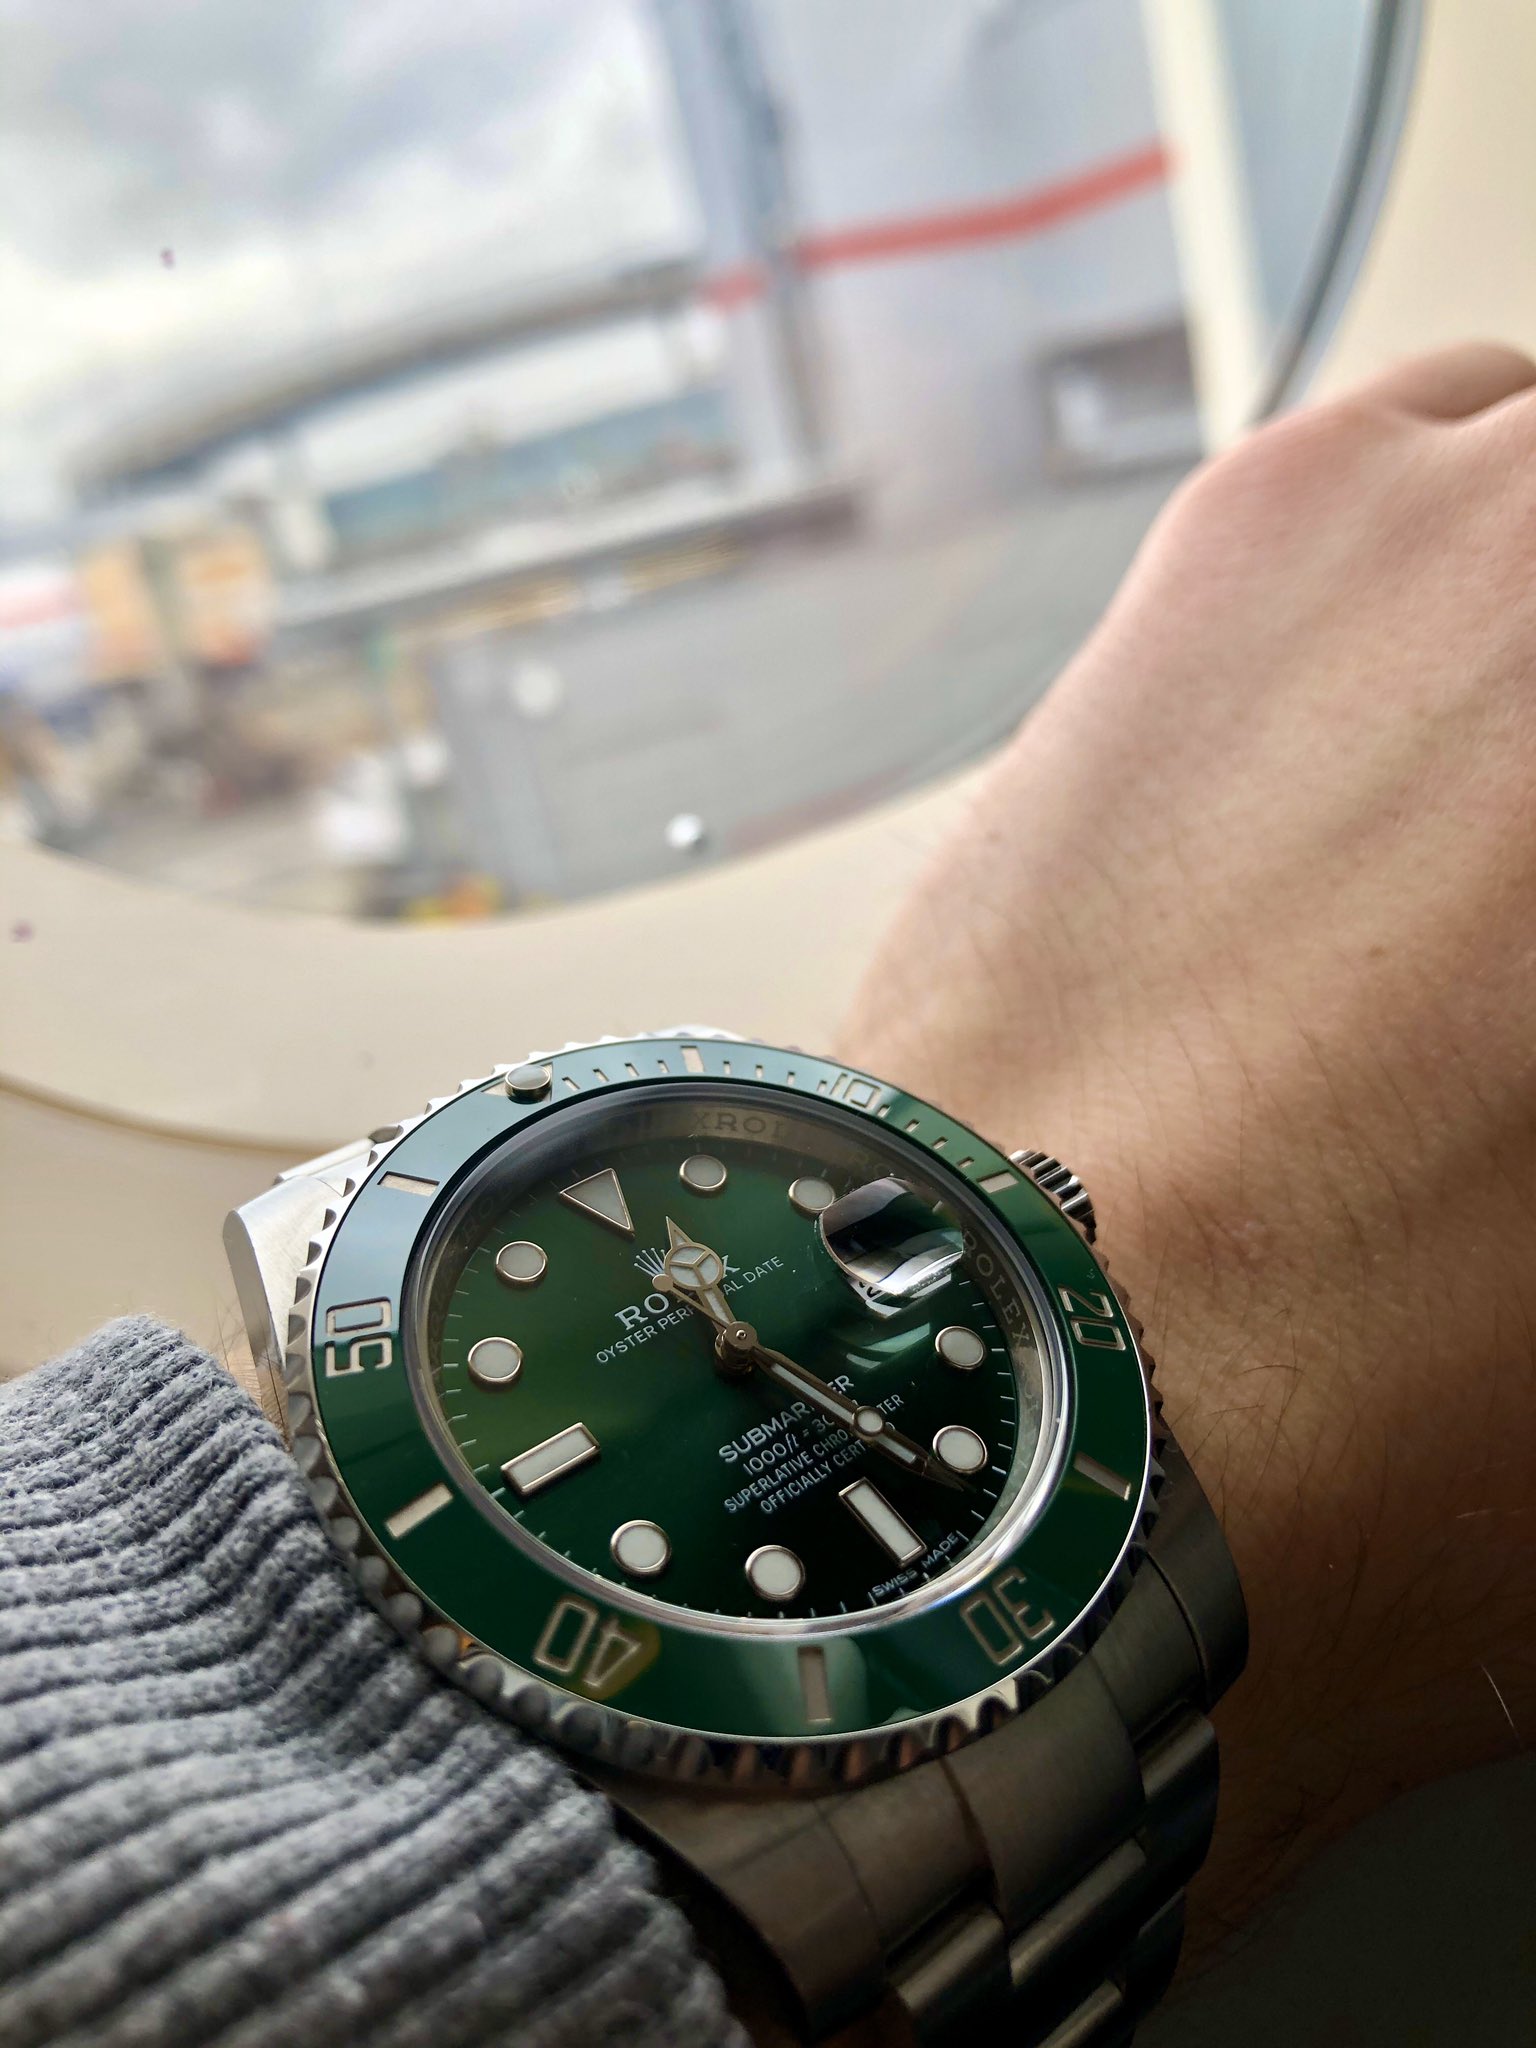 Seen Through Wrist on X: Captain, we're ready to depart! #Rolex